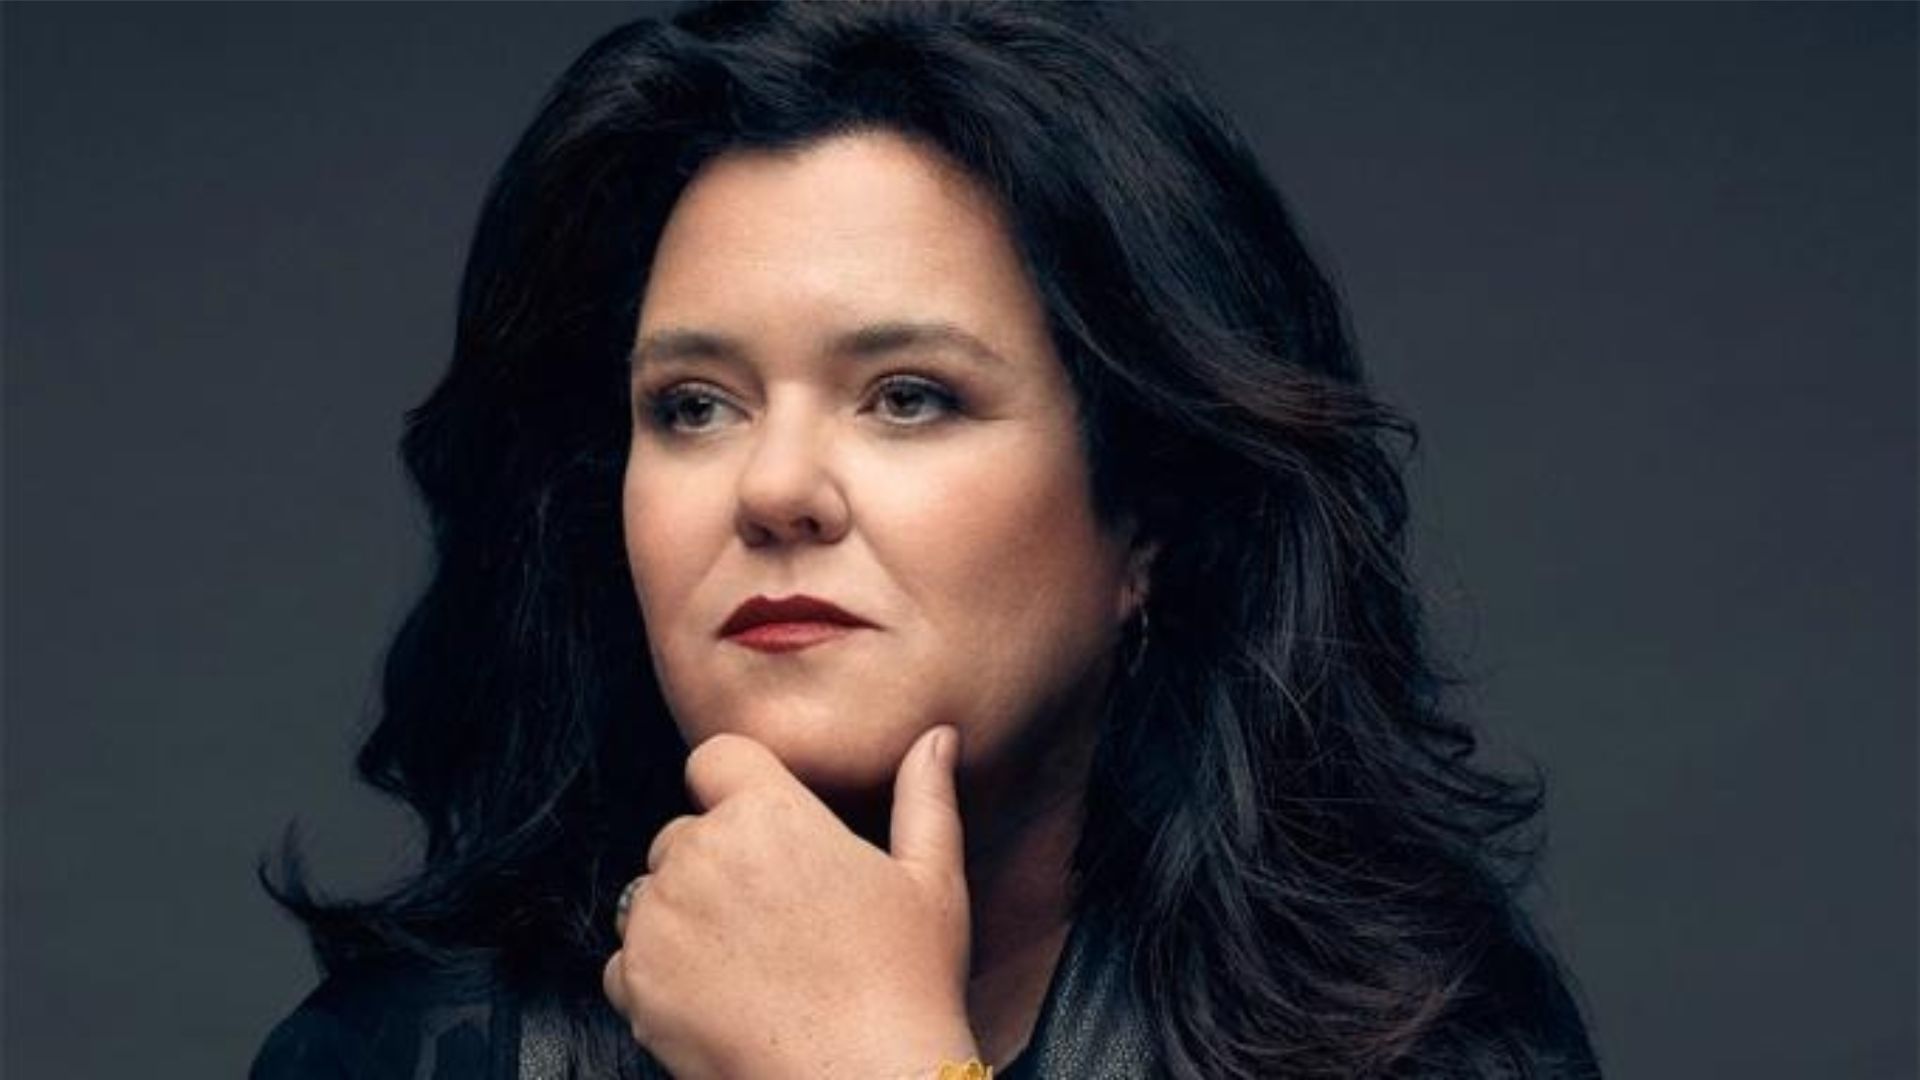 Rosie O'Donnell Thinking Posture